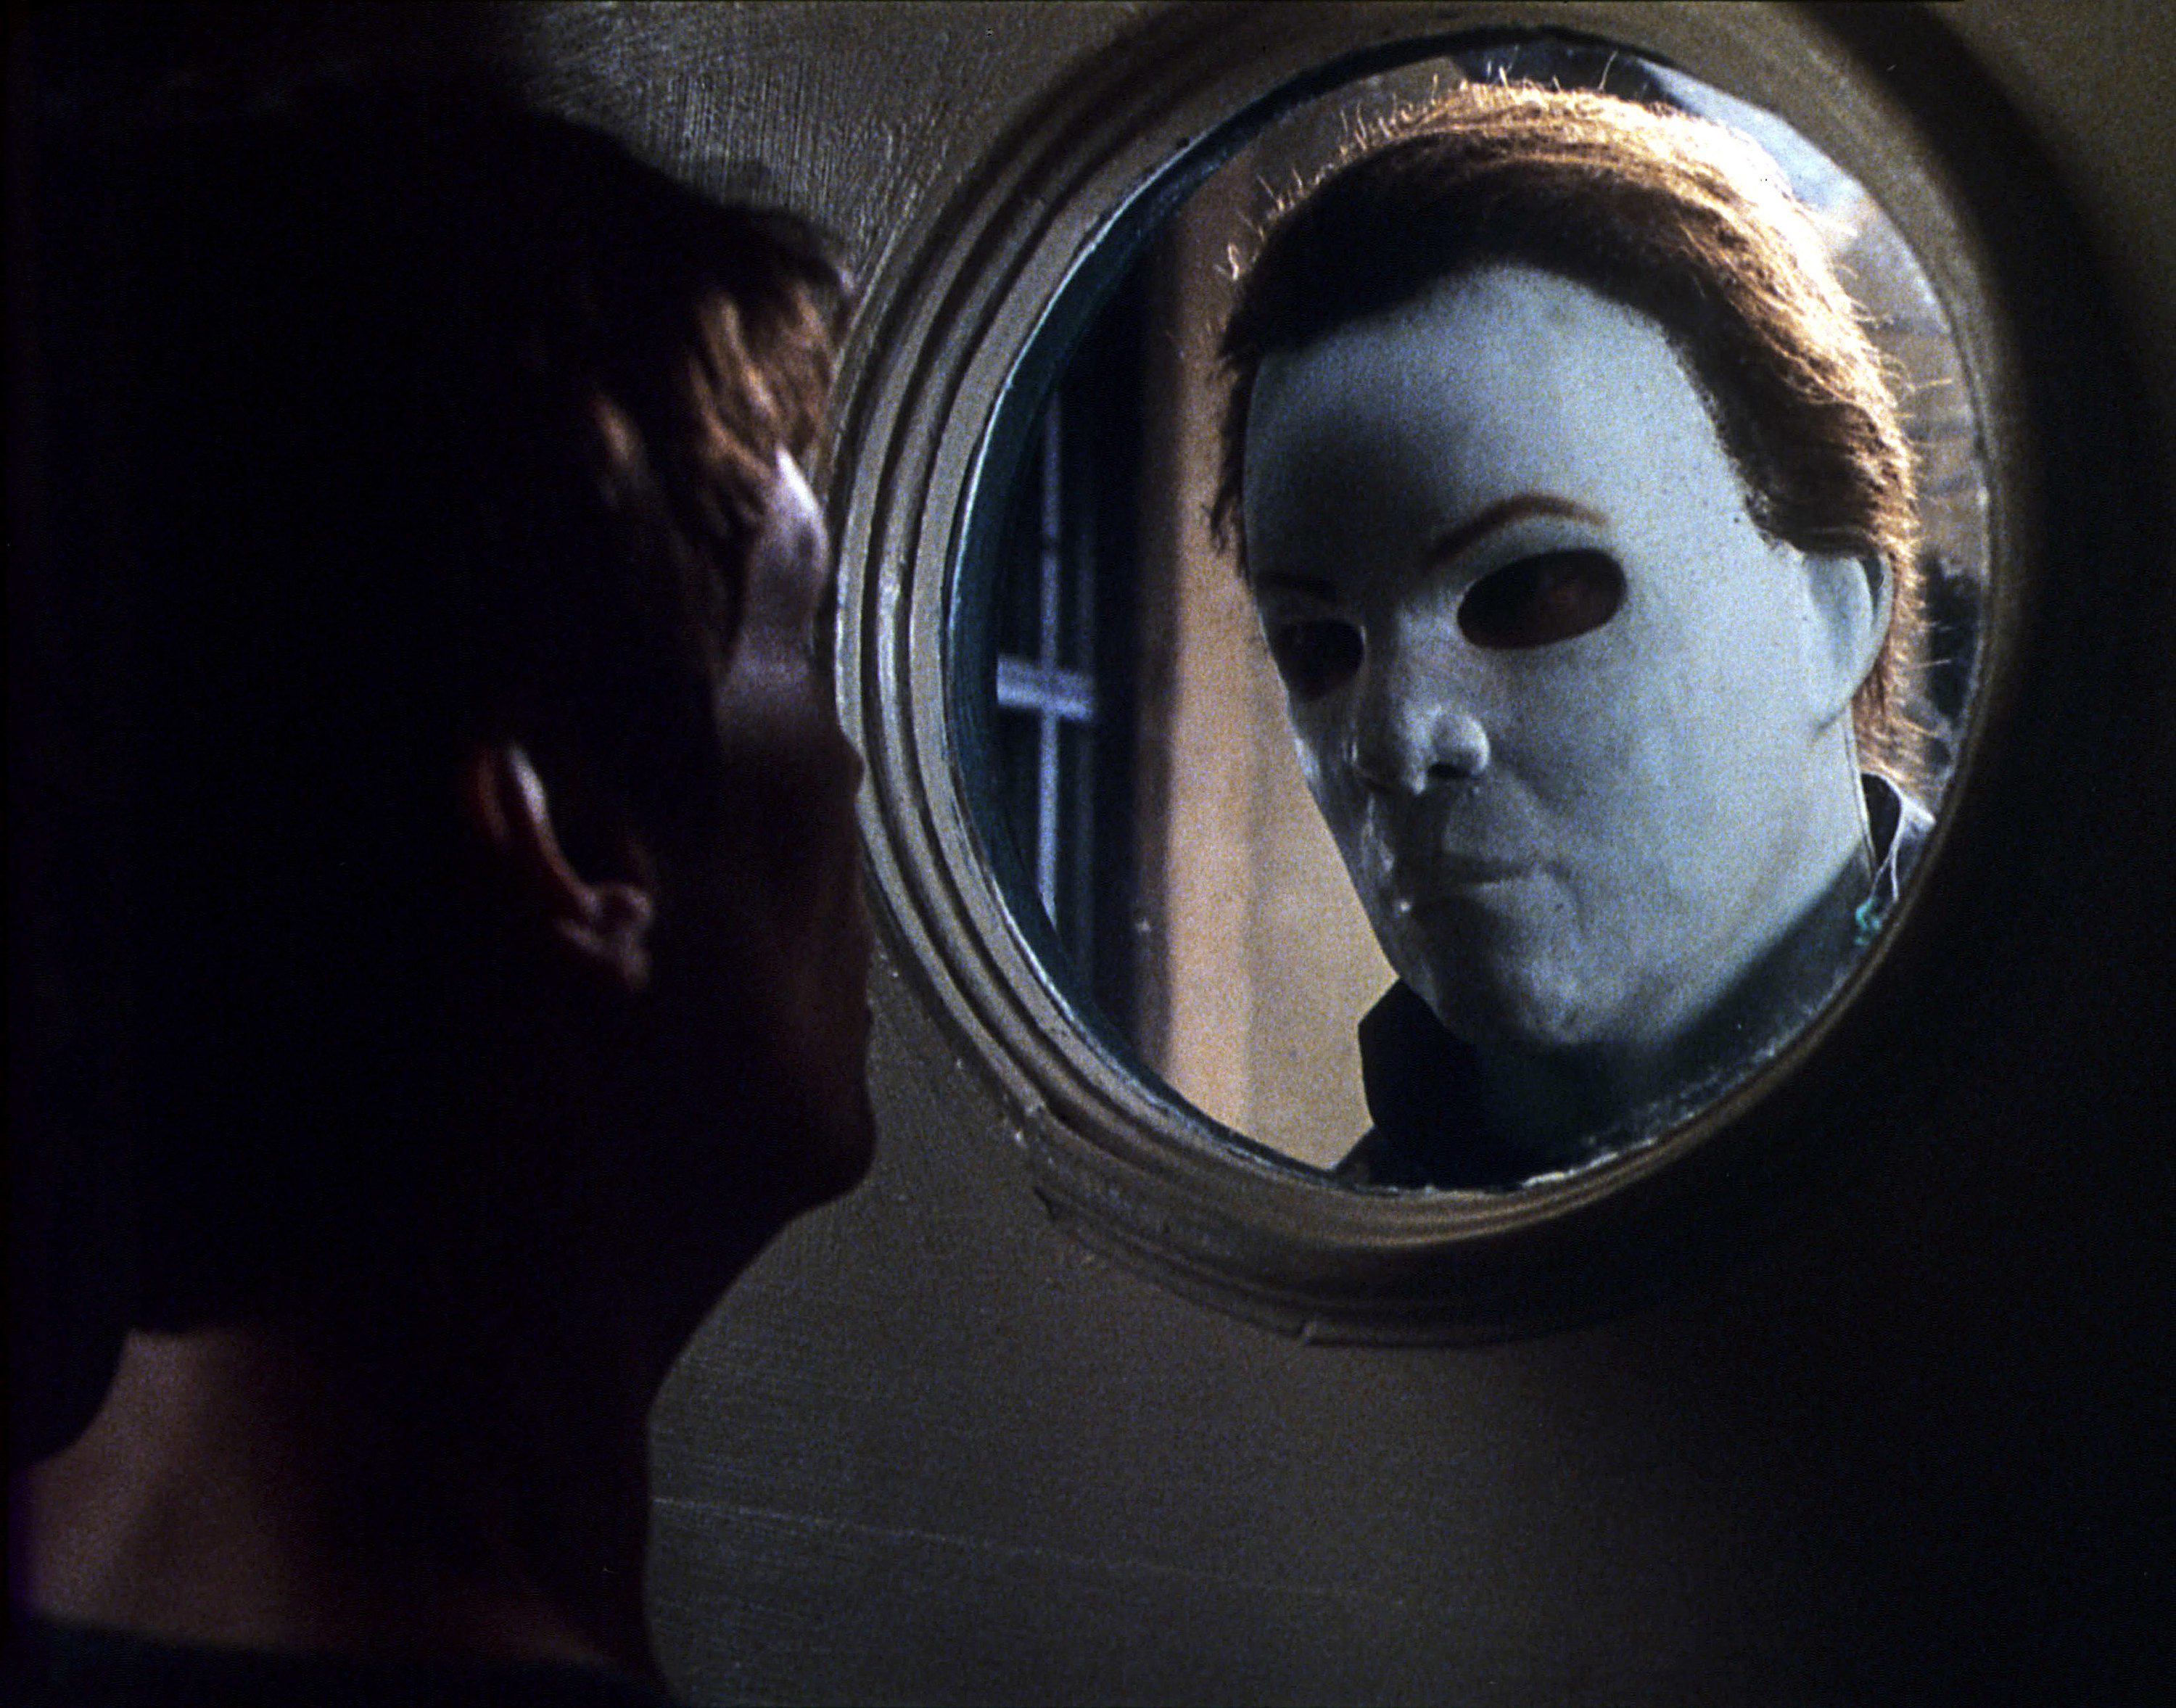 Laurie Strode and Michael Myers come face-to-face again in &quot;Halloween: H20 - 20 Years Later&quot;